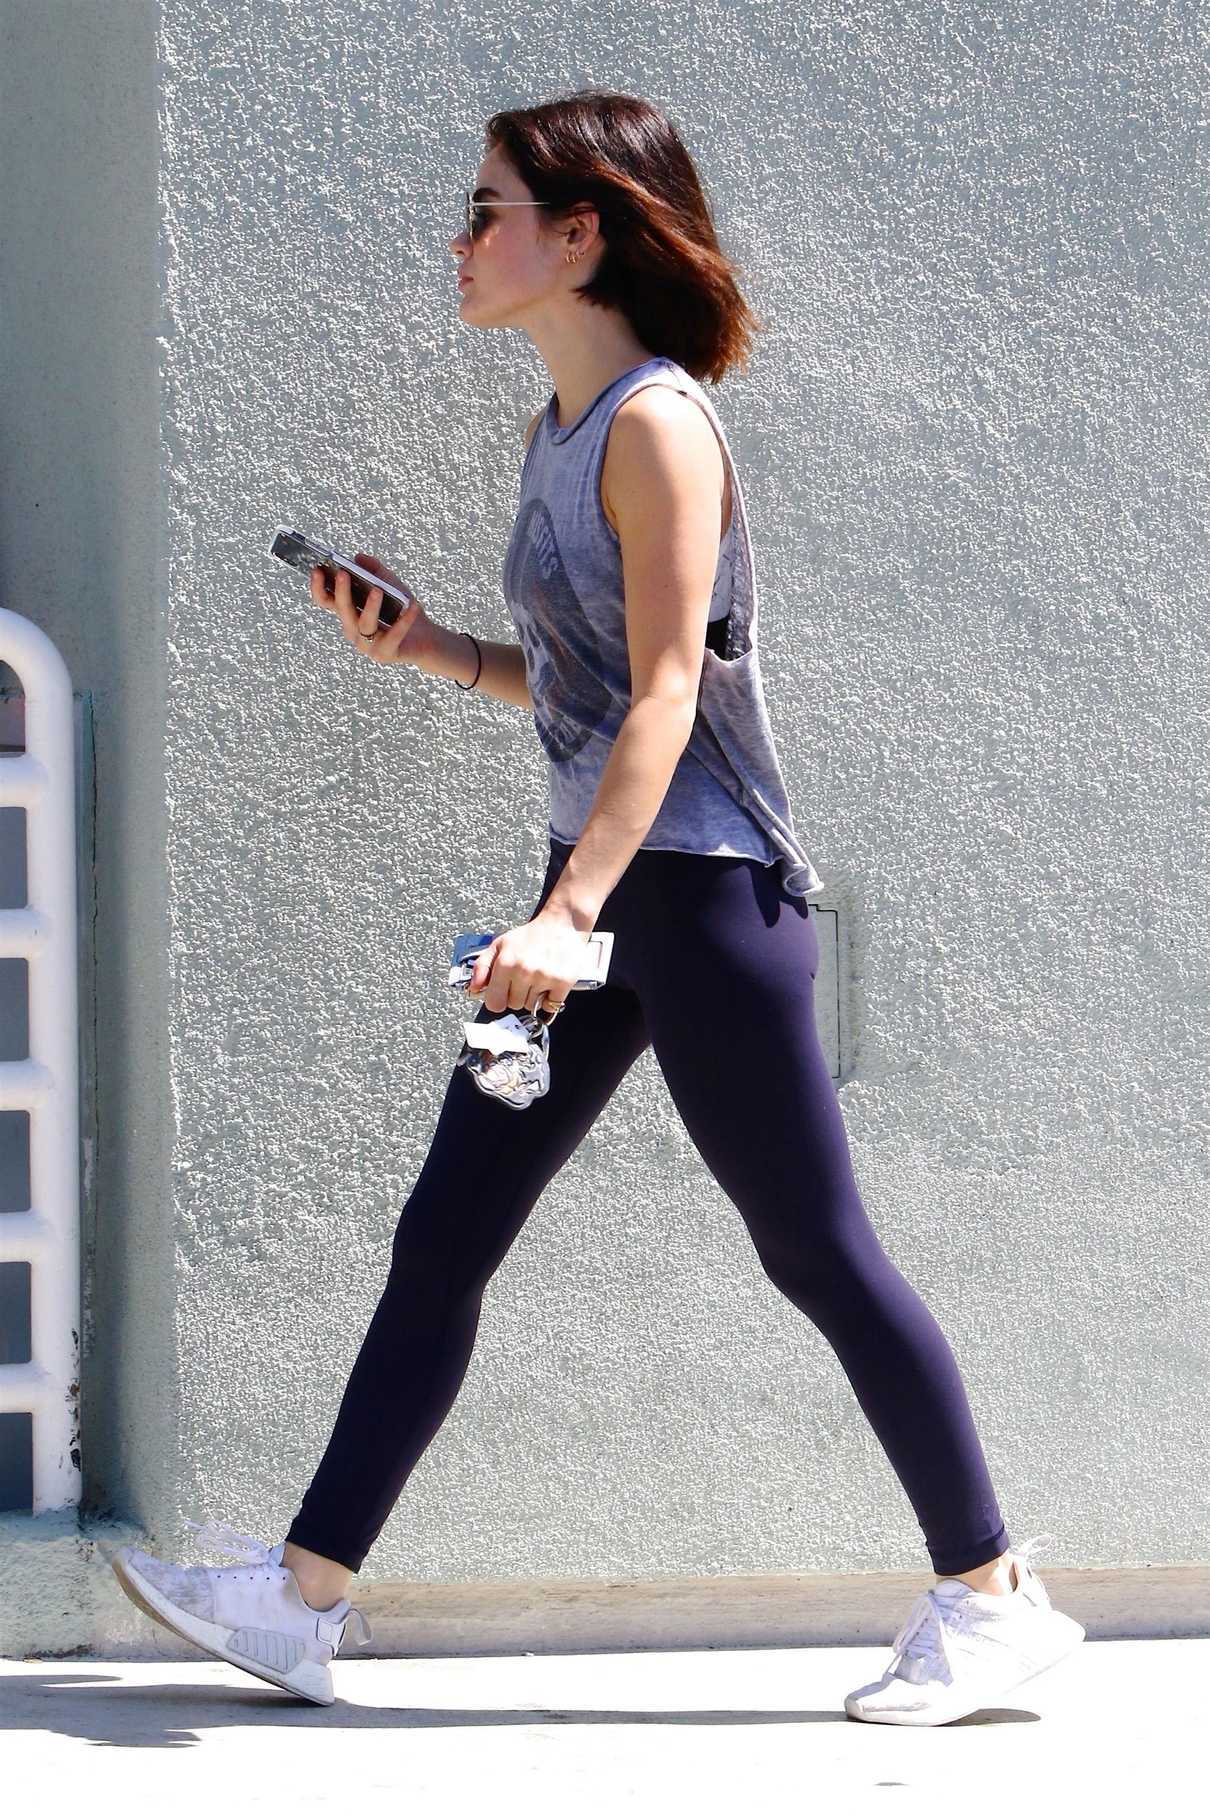 Lucy Hale in a Gray Tank Top